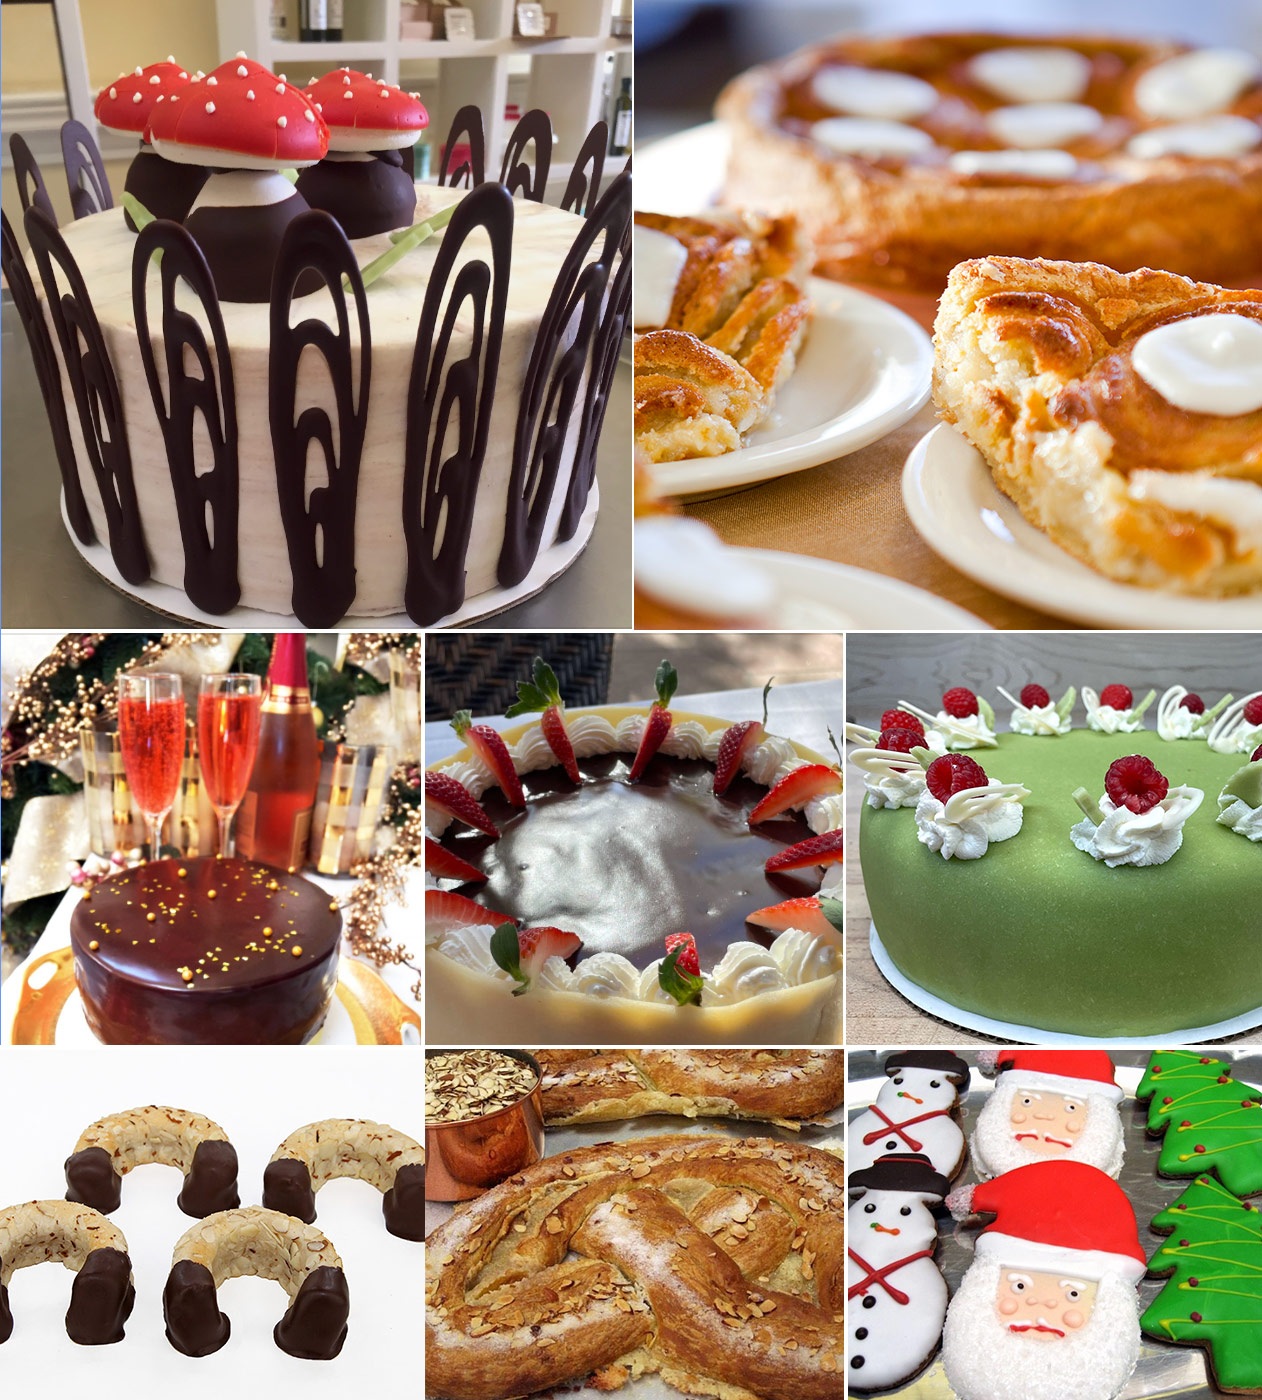 Christmas Desserts, Cakes, Pastry